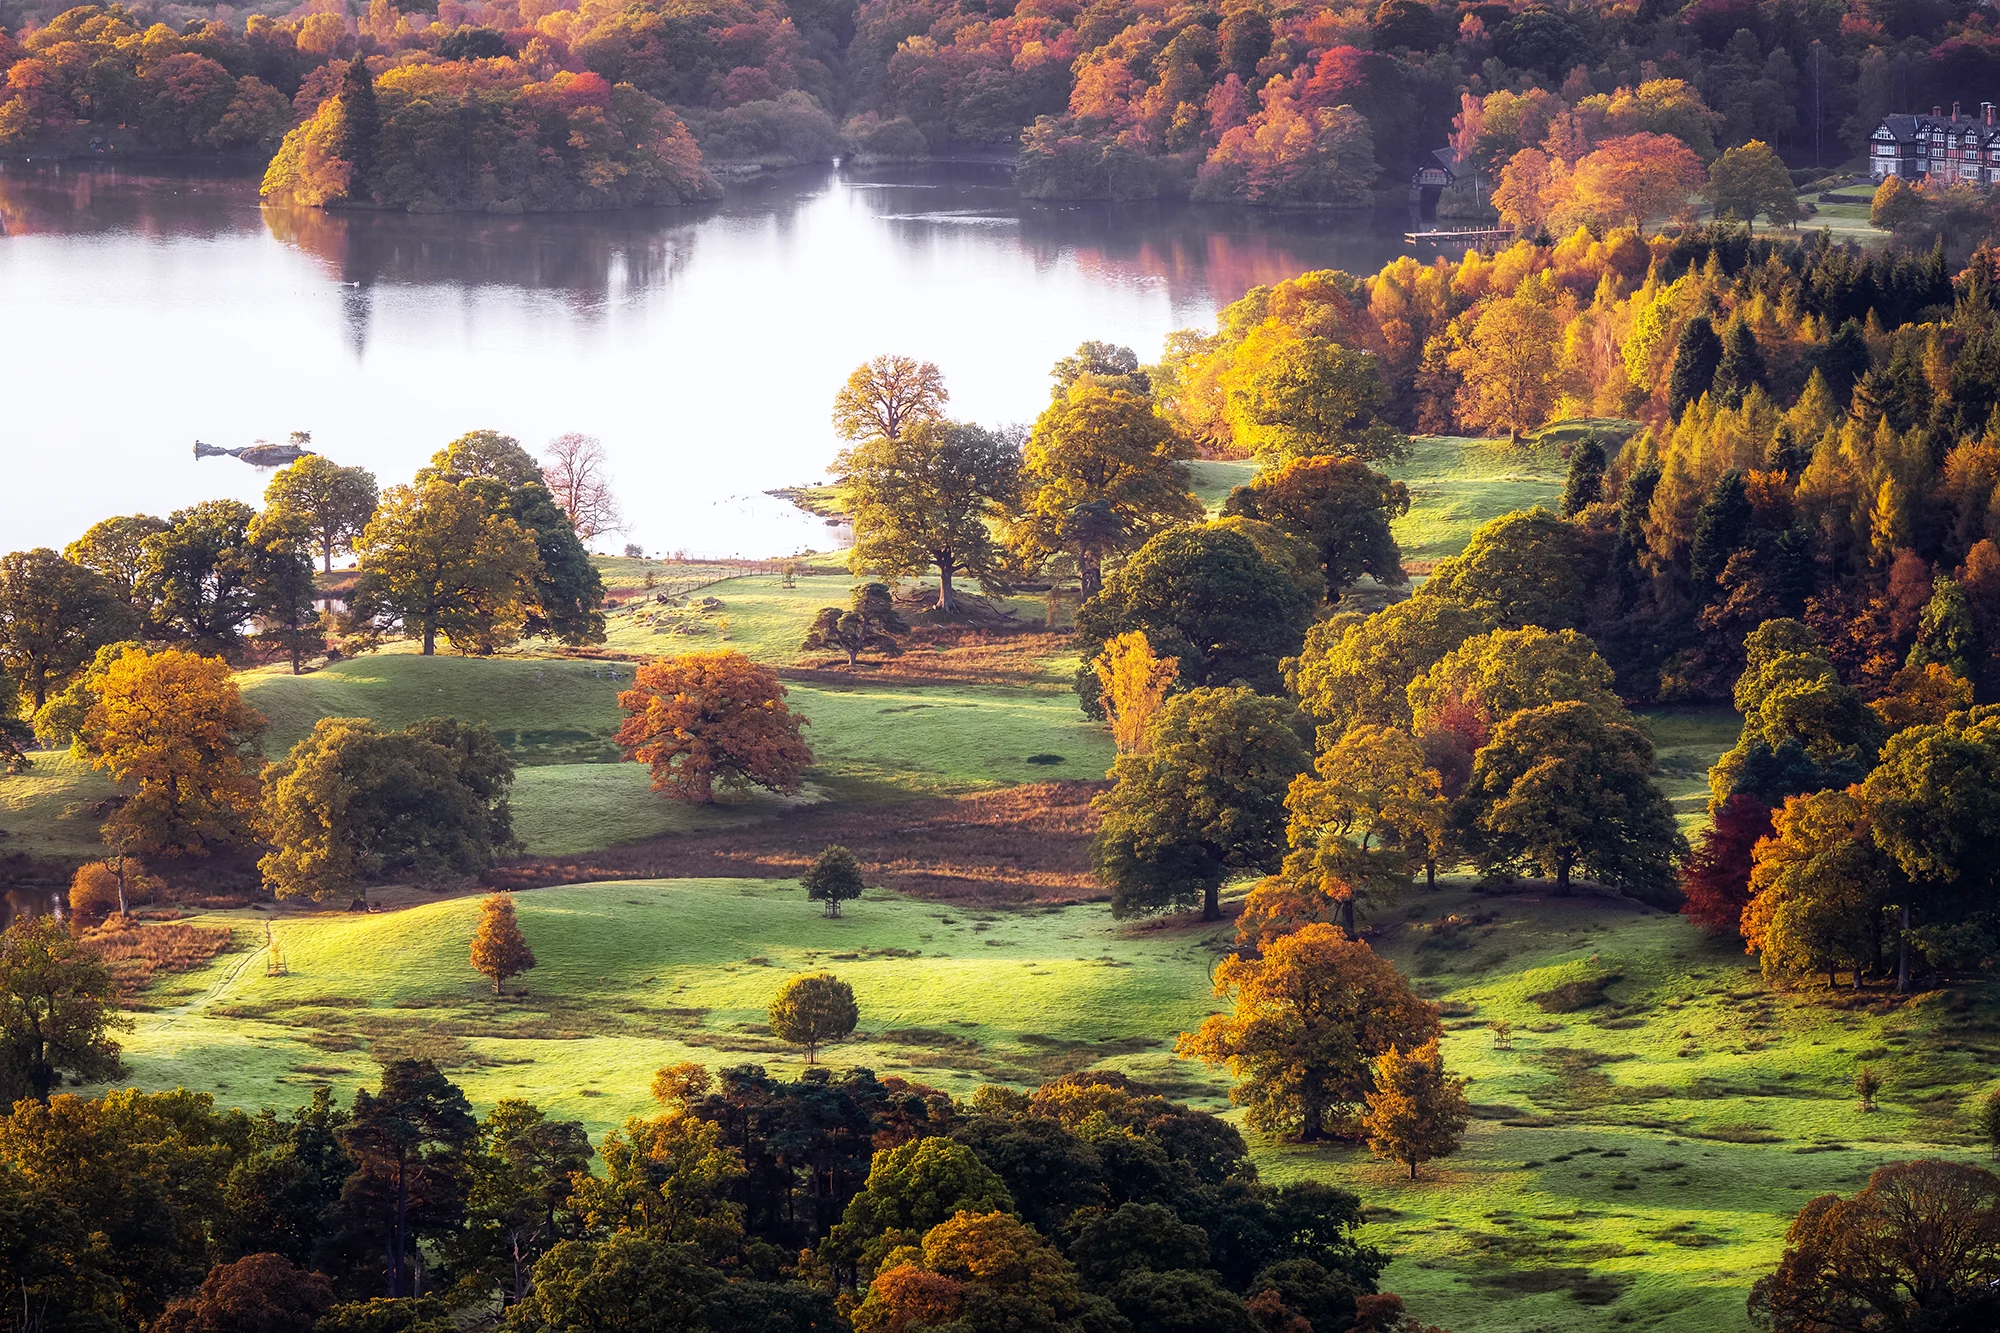 View of Lake Windermere with colourful autumn leaves on the surrounding trees